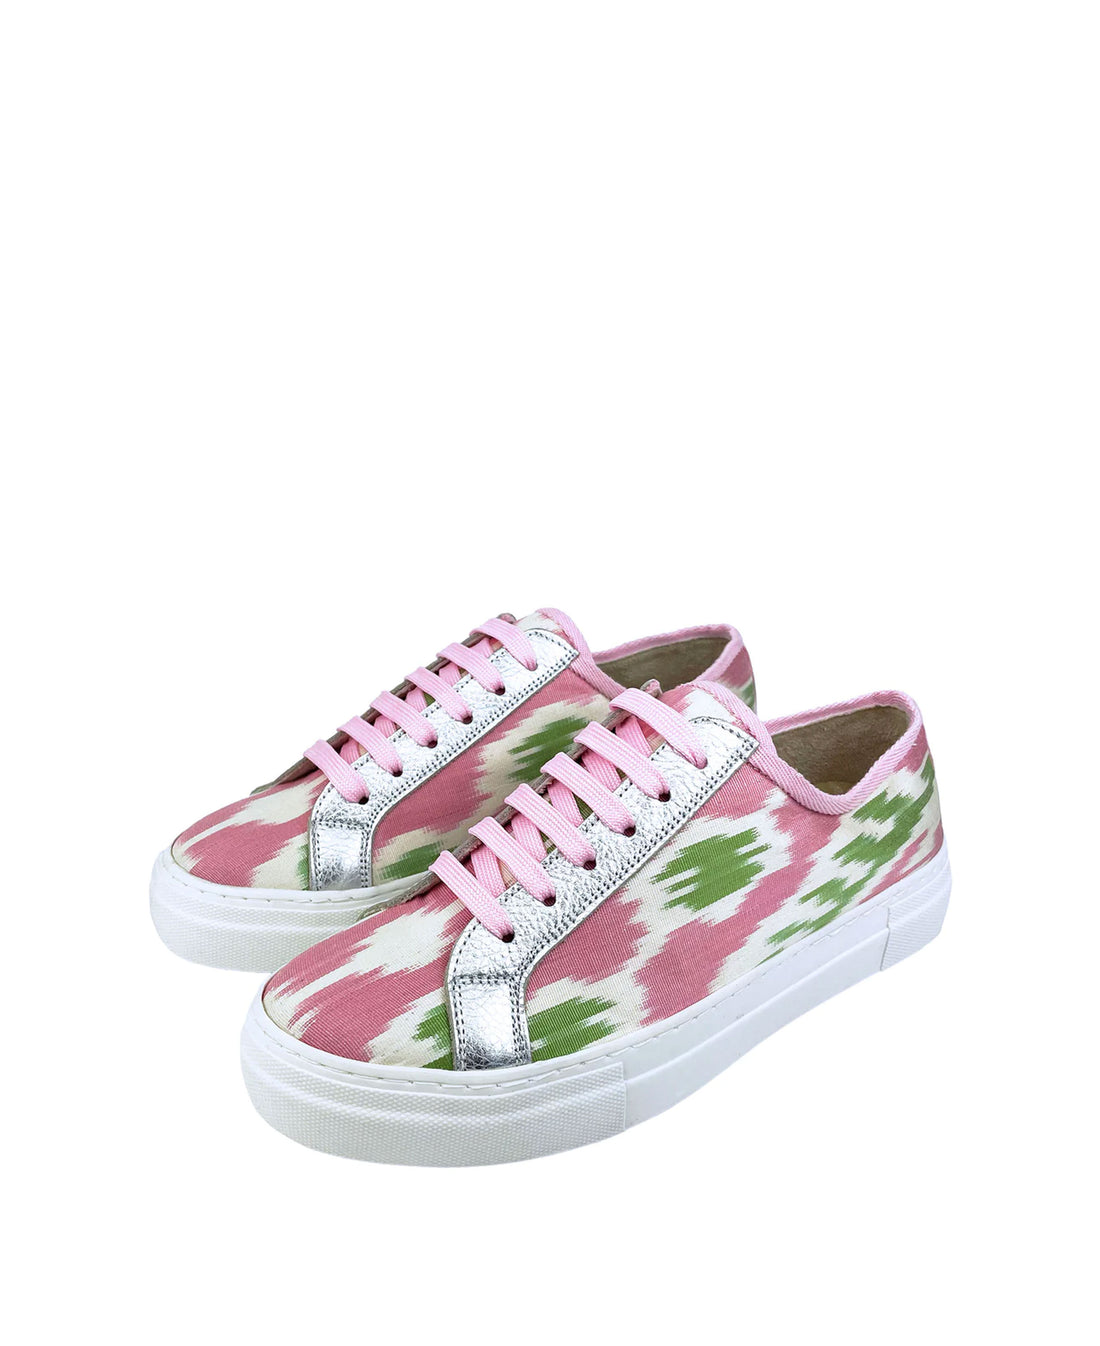 She Who Dares Sneakers - Pink Cabana